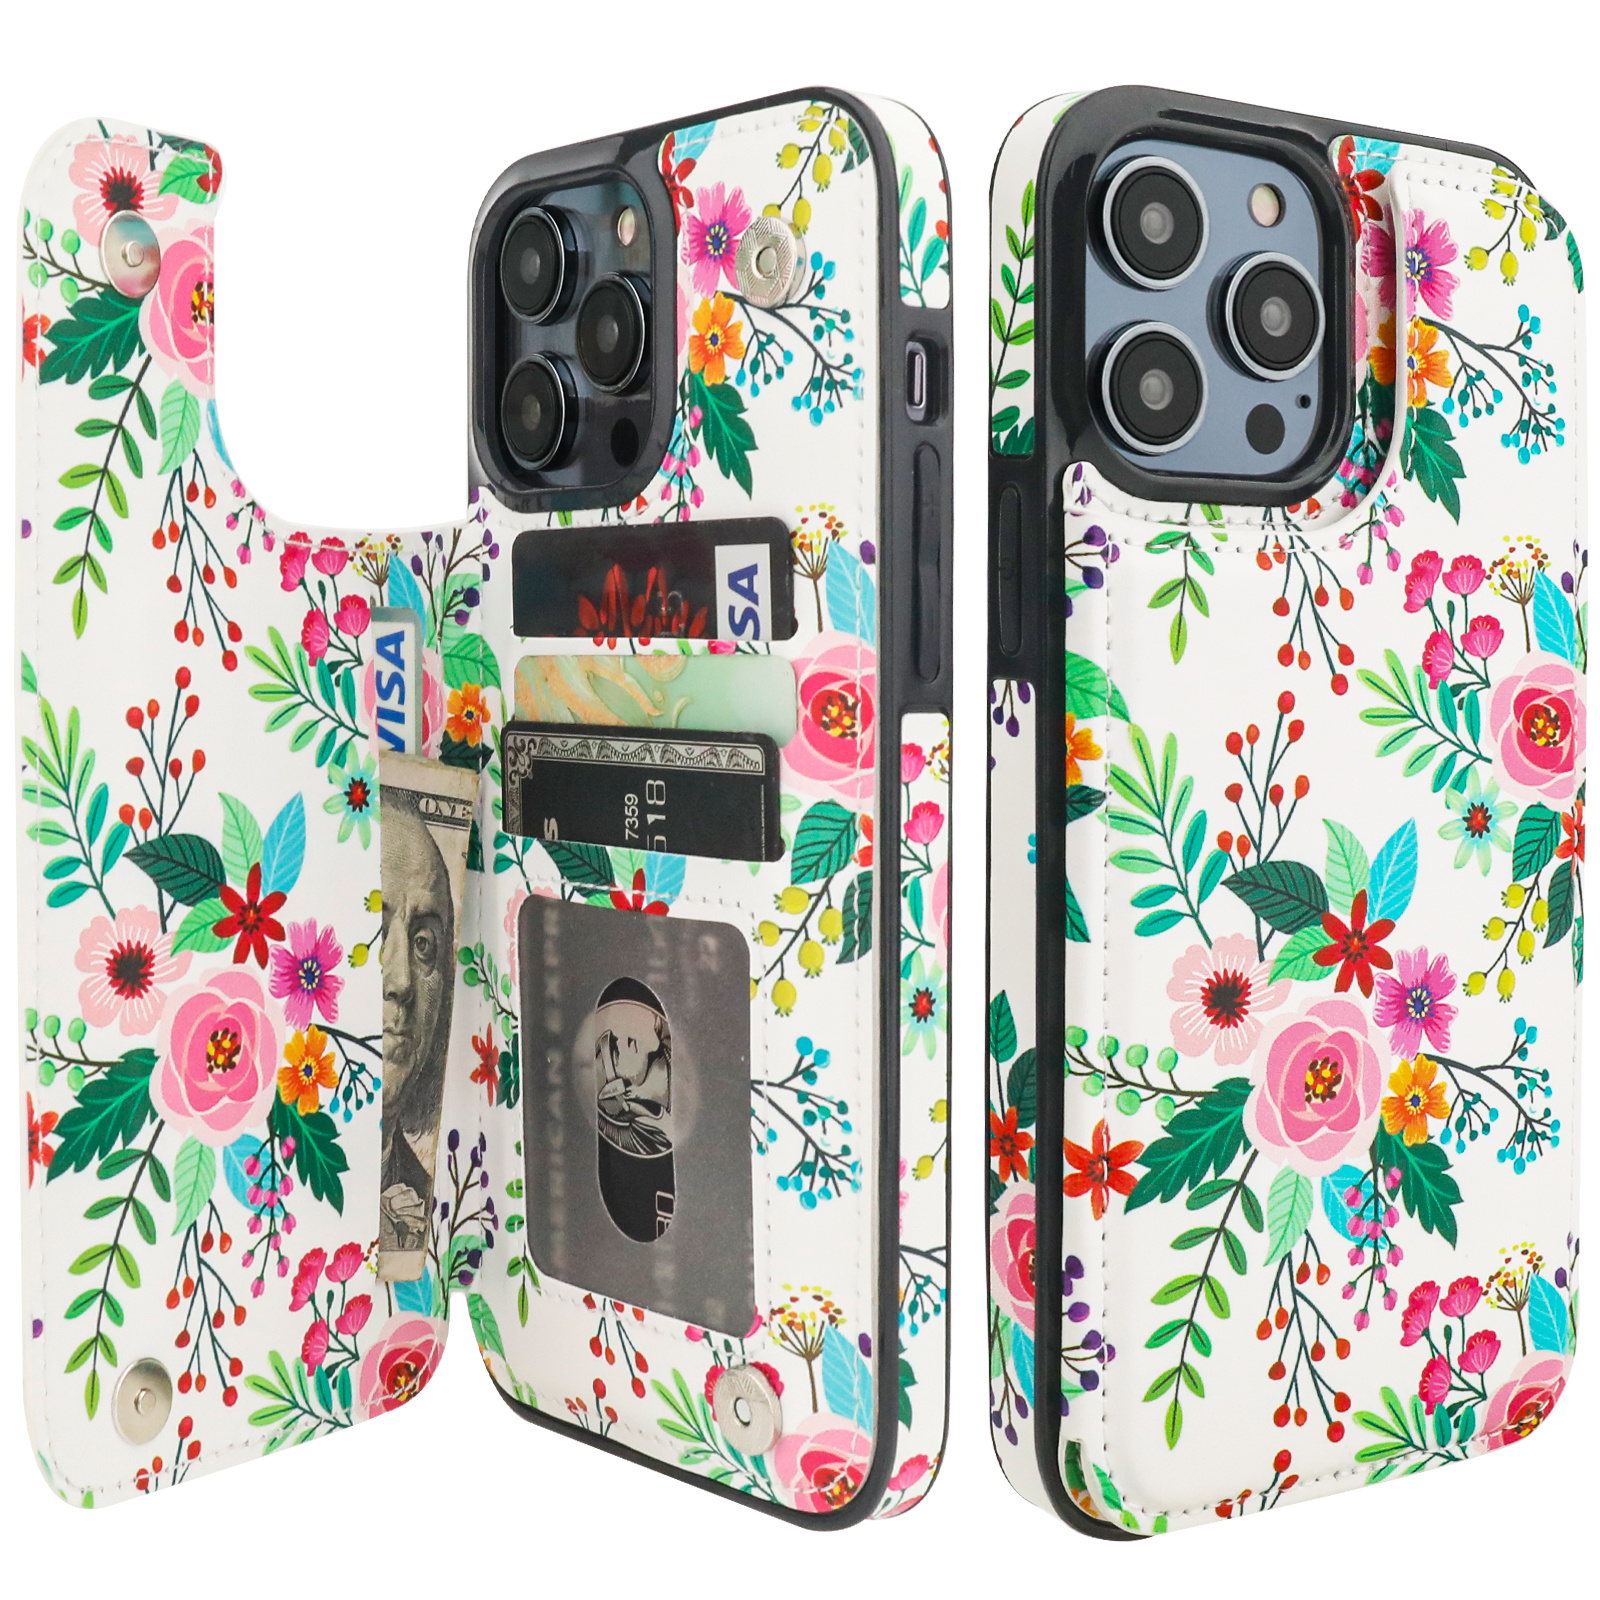 Emilio Pucci Flower Patterns Tropical Patterns Leather iPhone X iPhone XS